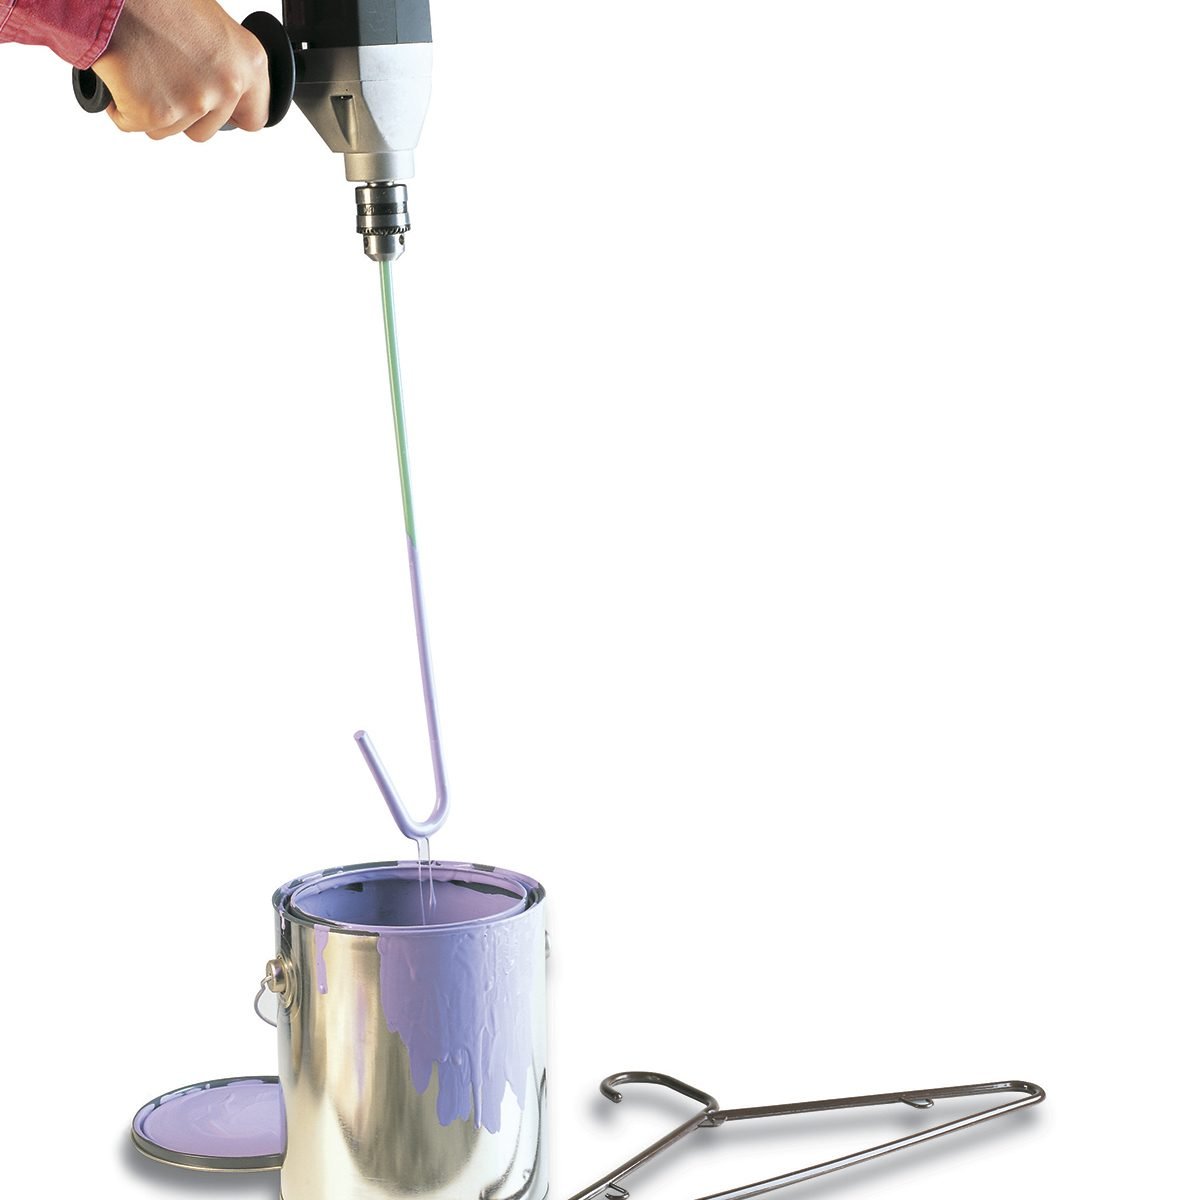 Power Paint Mixer — Workshop Tip from The Family Handyman